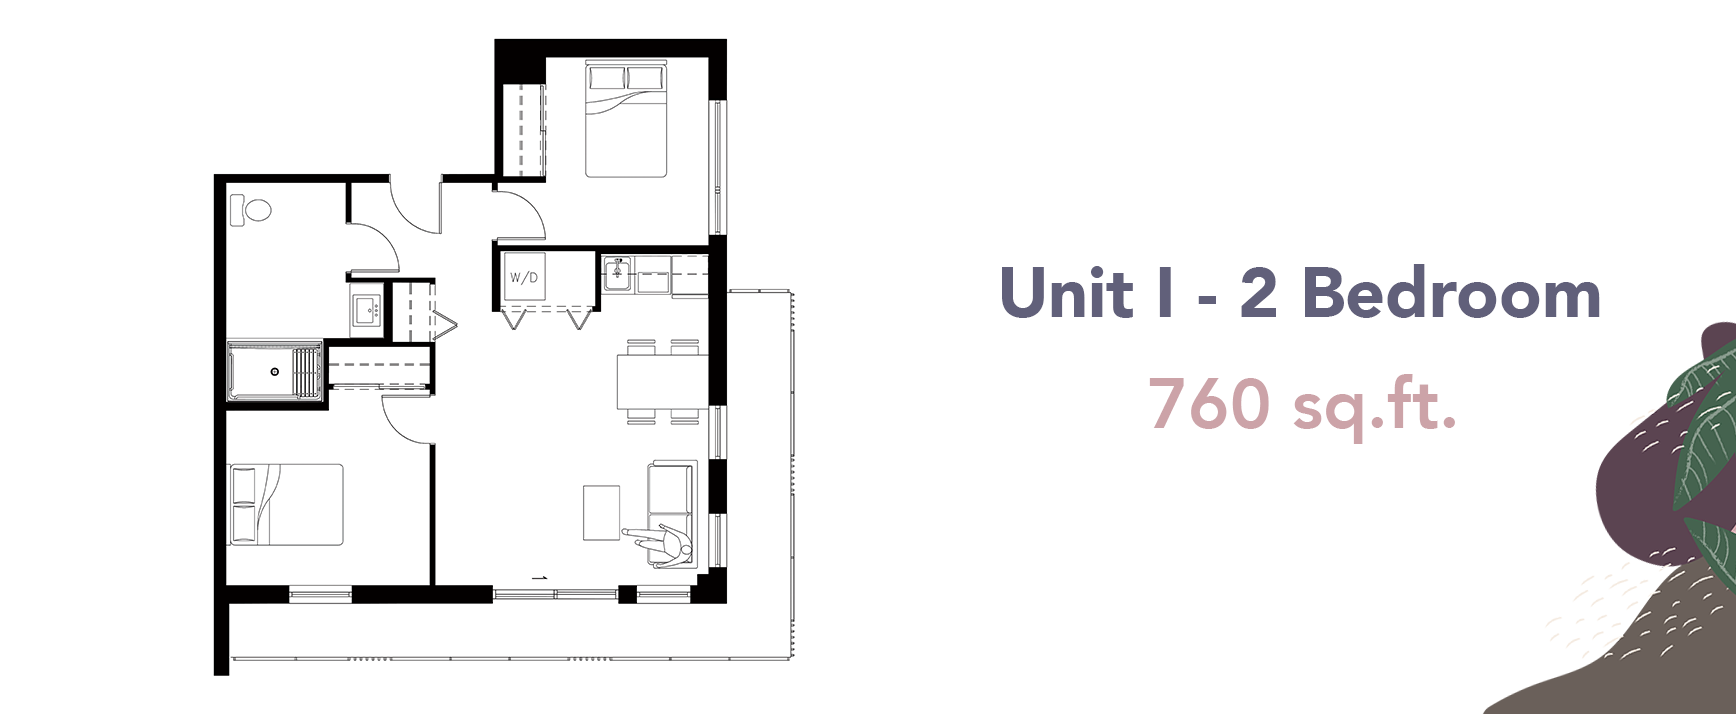 The floor plan of a Wisteria Place two bedroom senior apartment